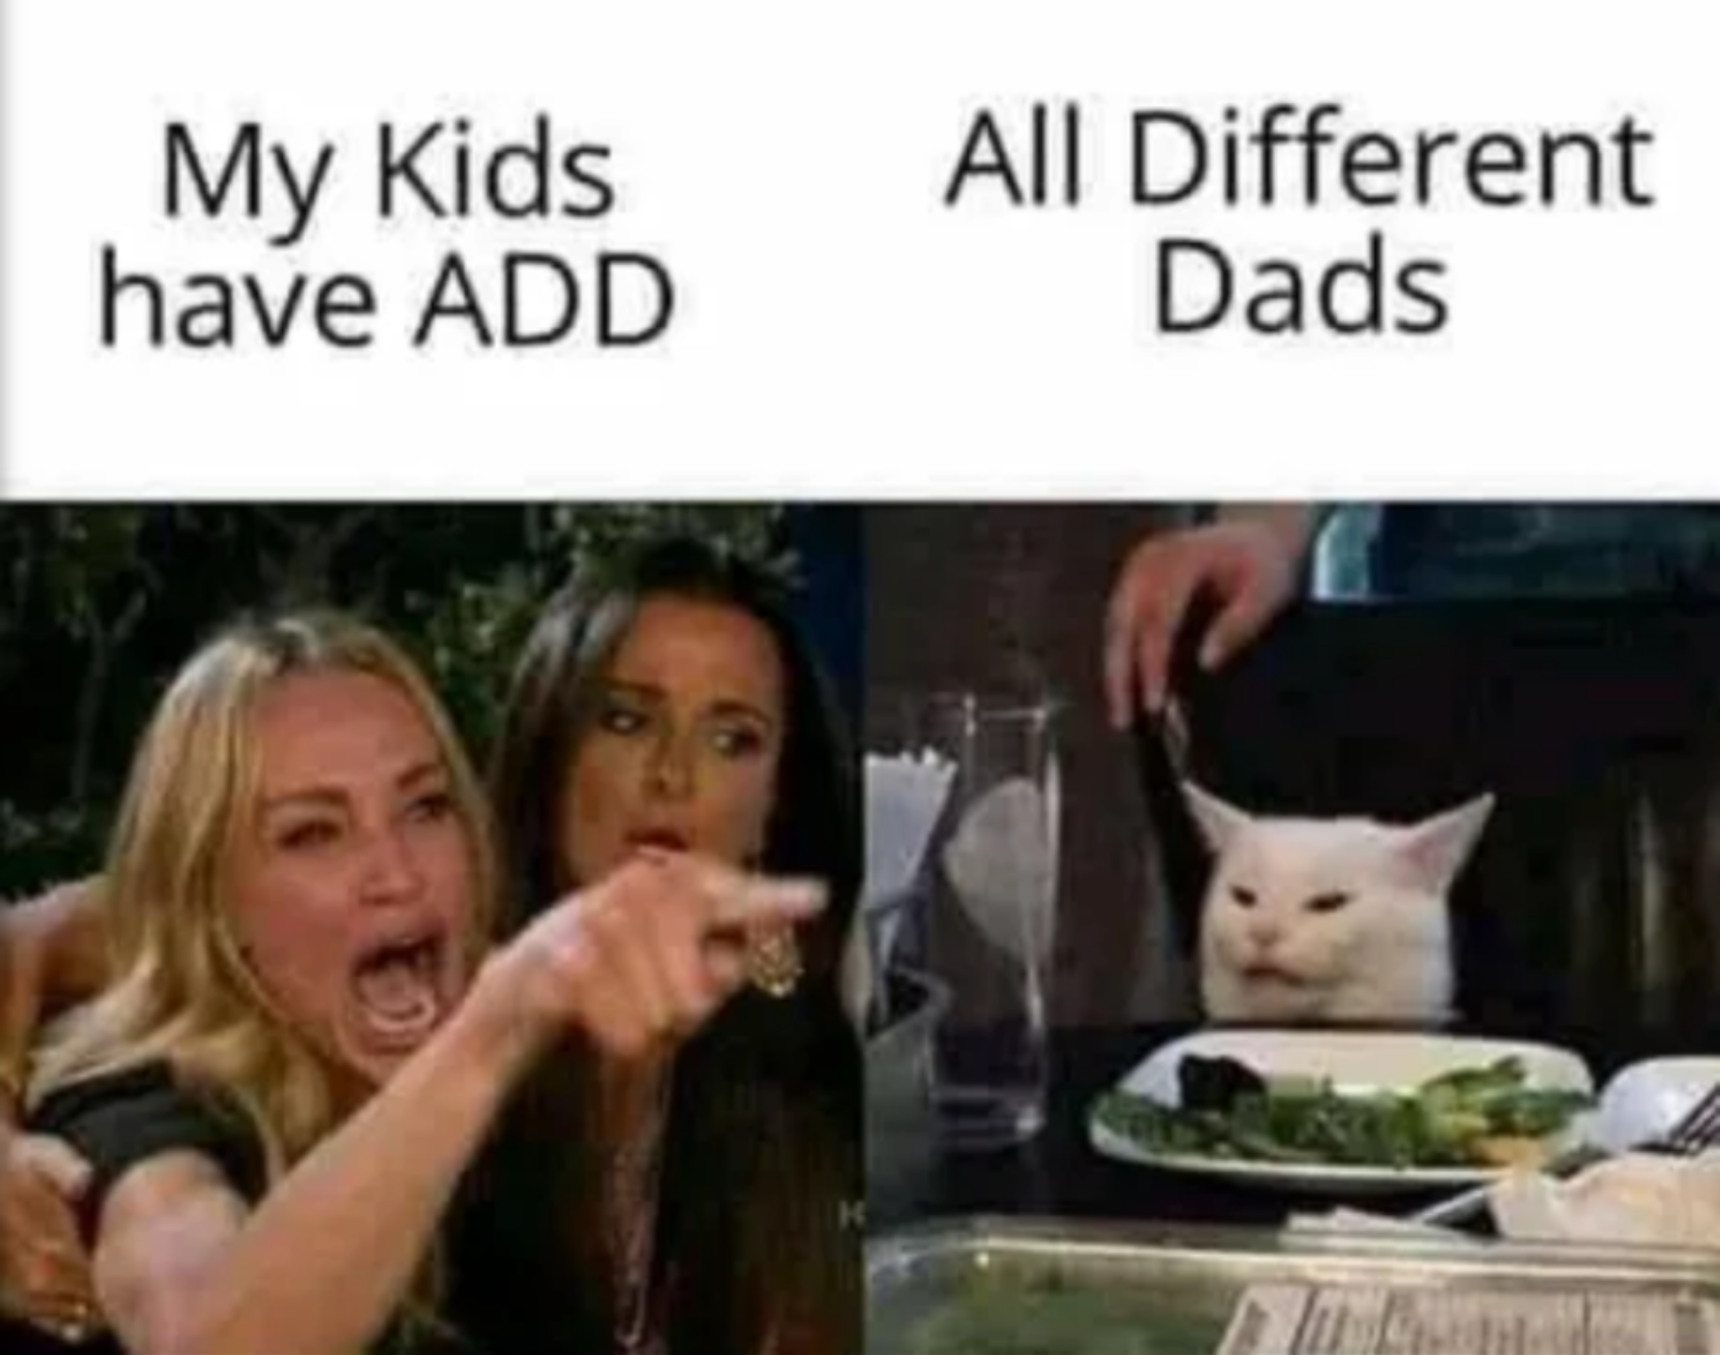 All different dad's - meme